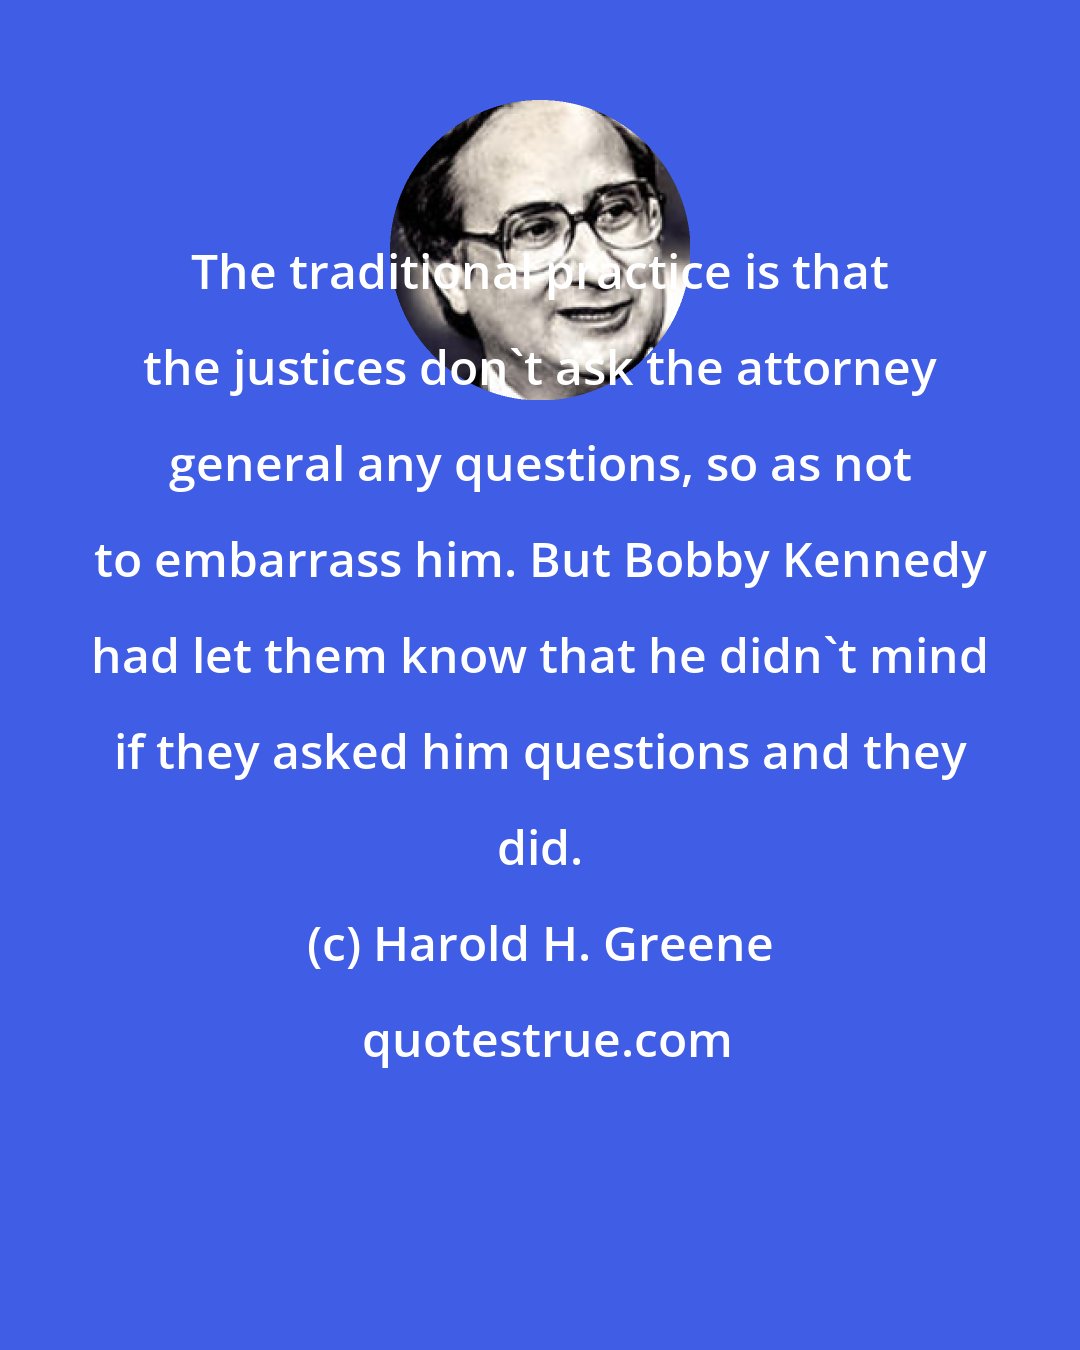 Harold H. Greene: The traditional practice is that the justices don't ask the attorney general any questions, so as not to embarrass him. But Bobby Kennedy had let them know that he didn't mind if they asked him questions and they did.